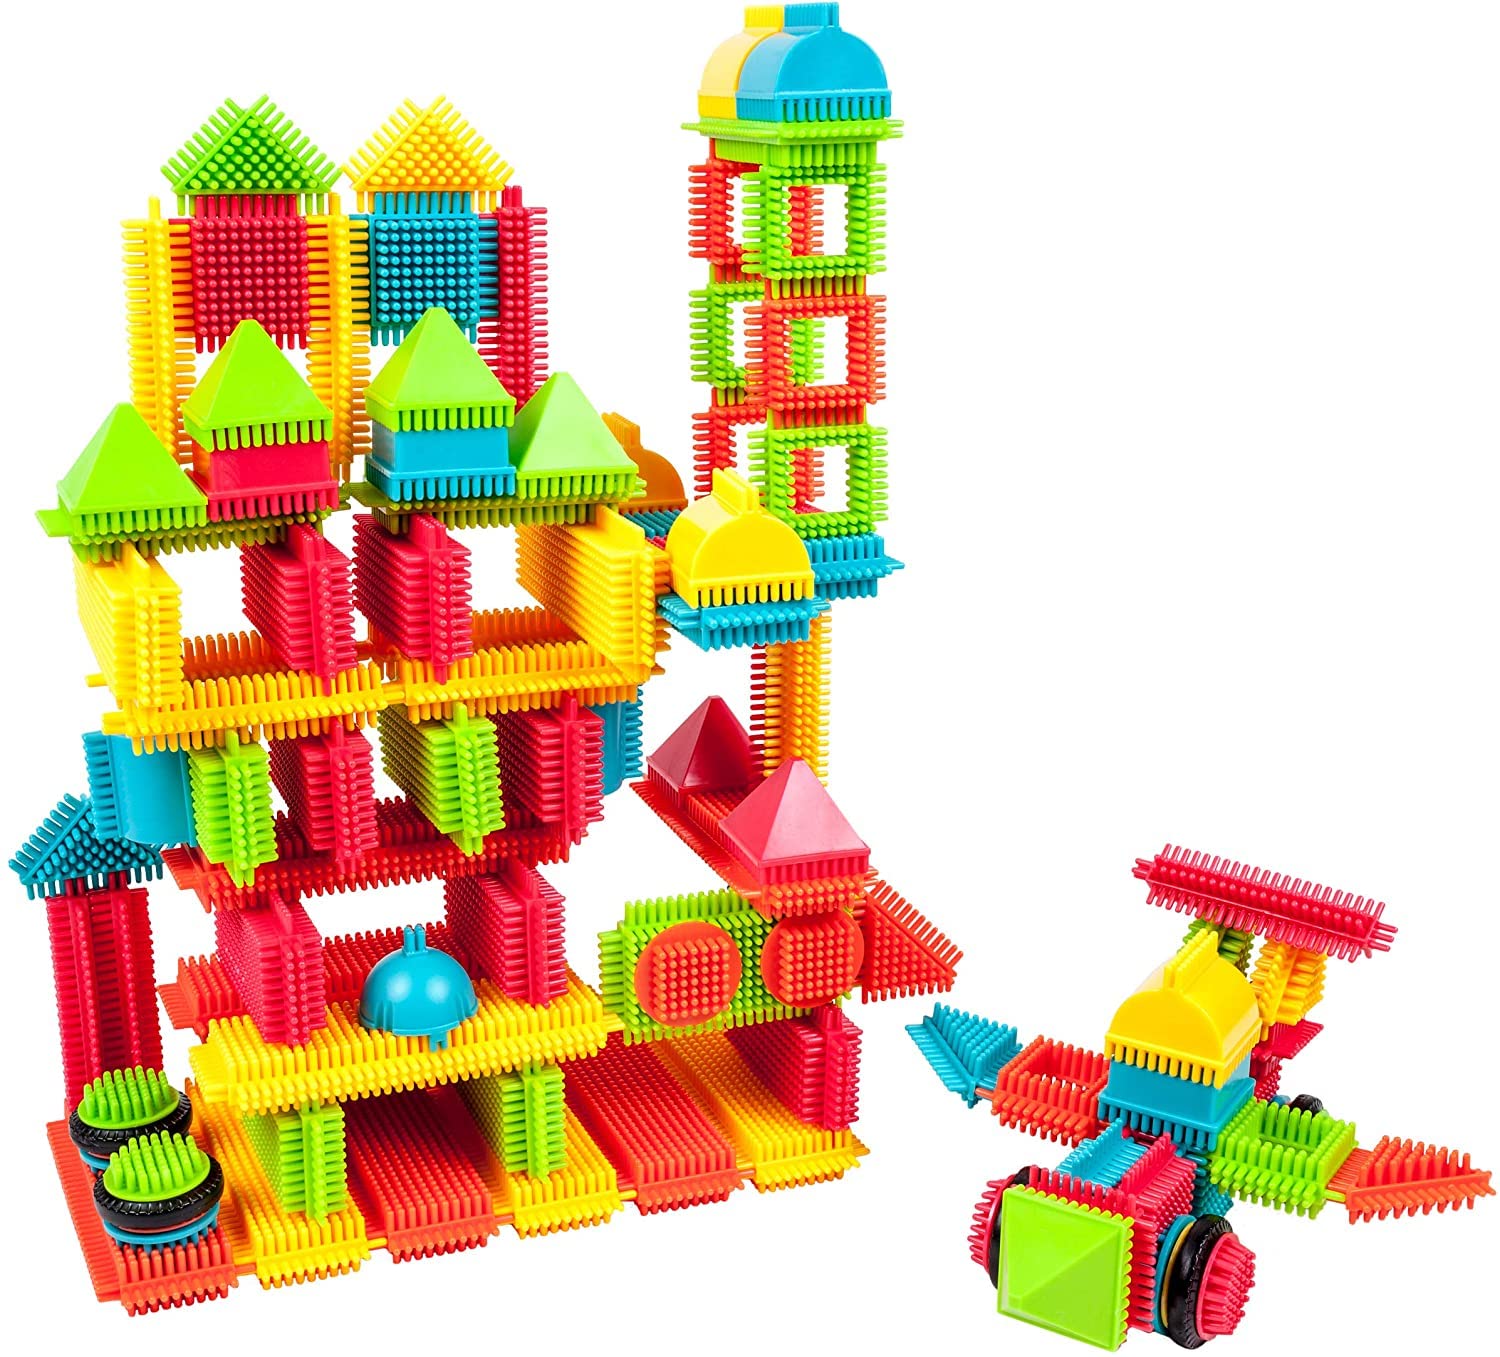 240pcs Bristle Lock Building Blocks+ Construction Engineering Kit Toy STEM Learning Toys Building Block Kids Early Education Playset w/Free IdeaBook, Power Drill, Clickable Ratchet Tiles Stacking Set